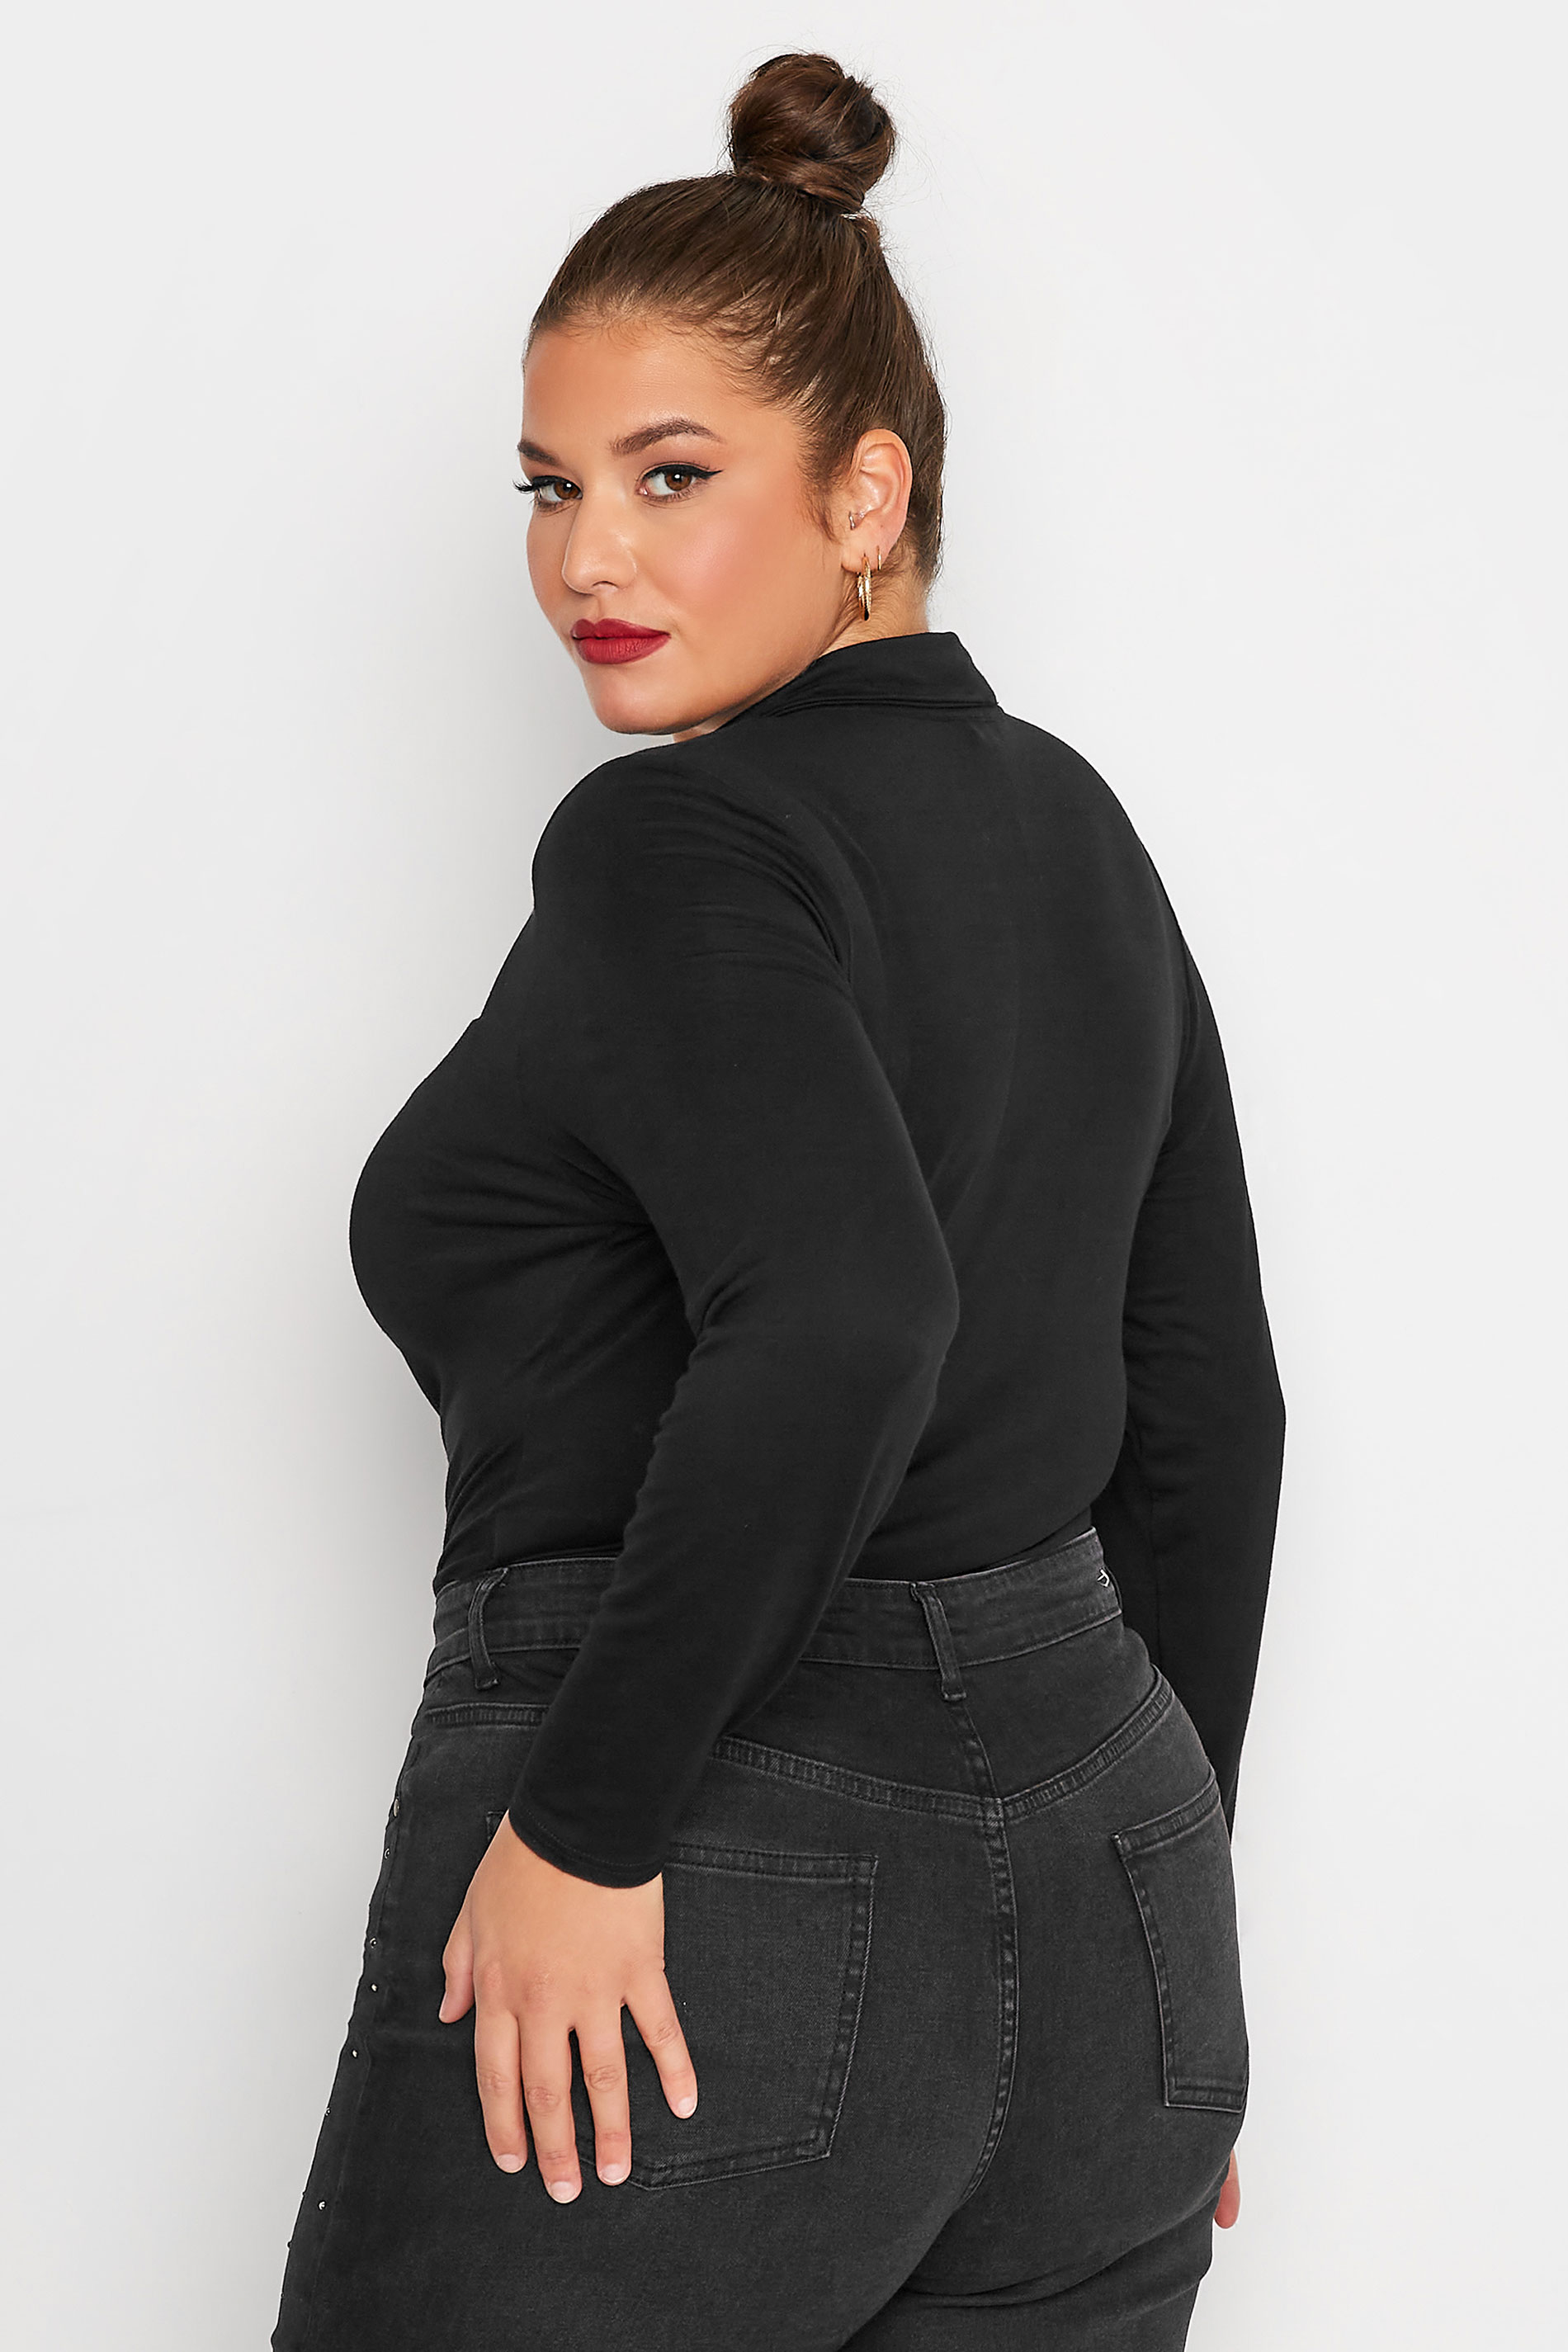 LIMITED COLLECTION Plus Size Black Ruched Front Bodysuit | Yours Clothing  3